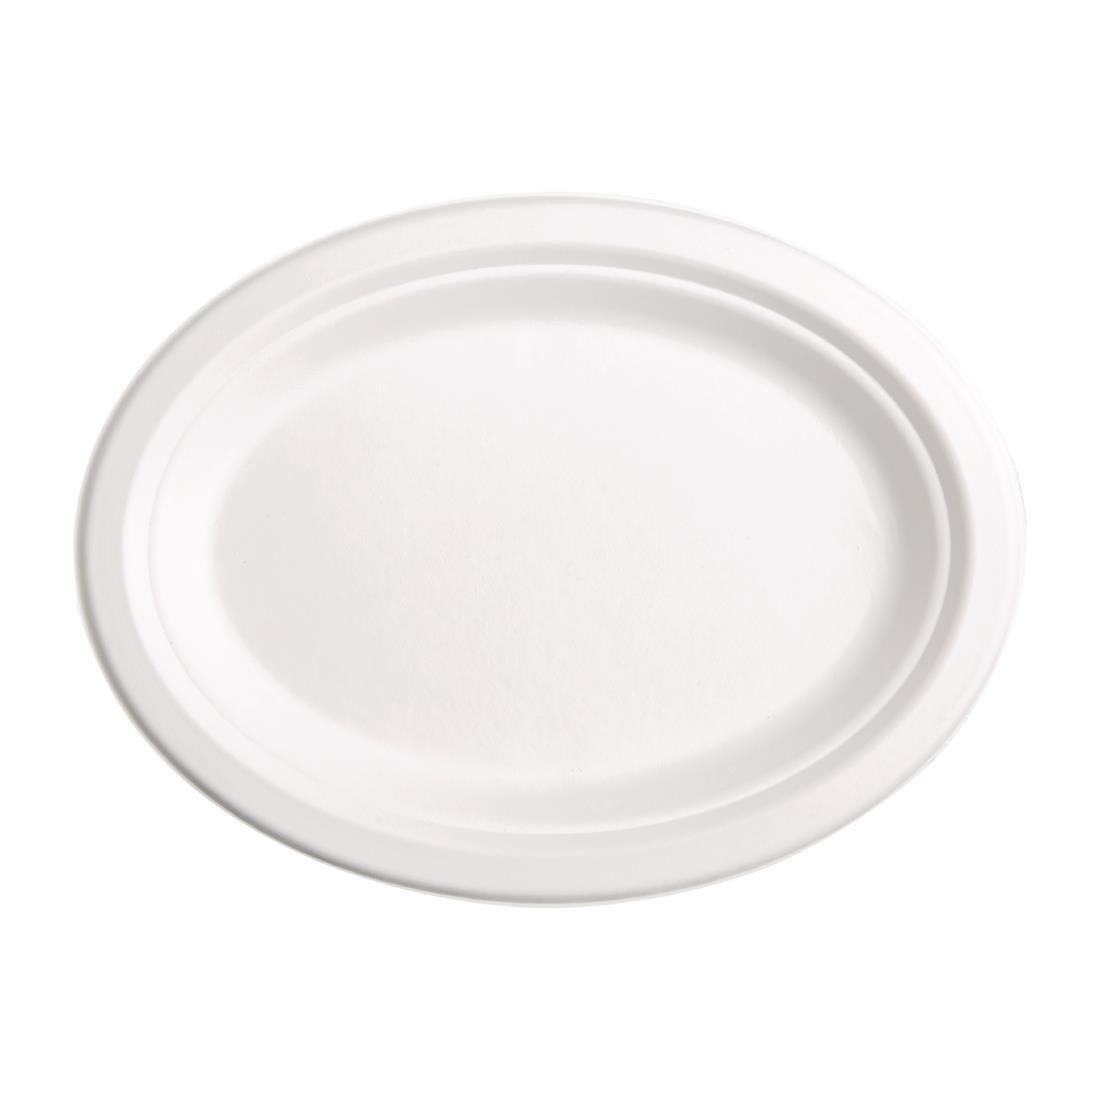 Fiesta Compostable Bagasse Oval Plates 198mm (Pack of 50) - FC534  - 2